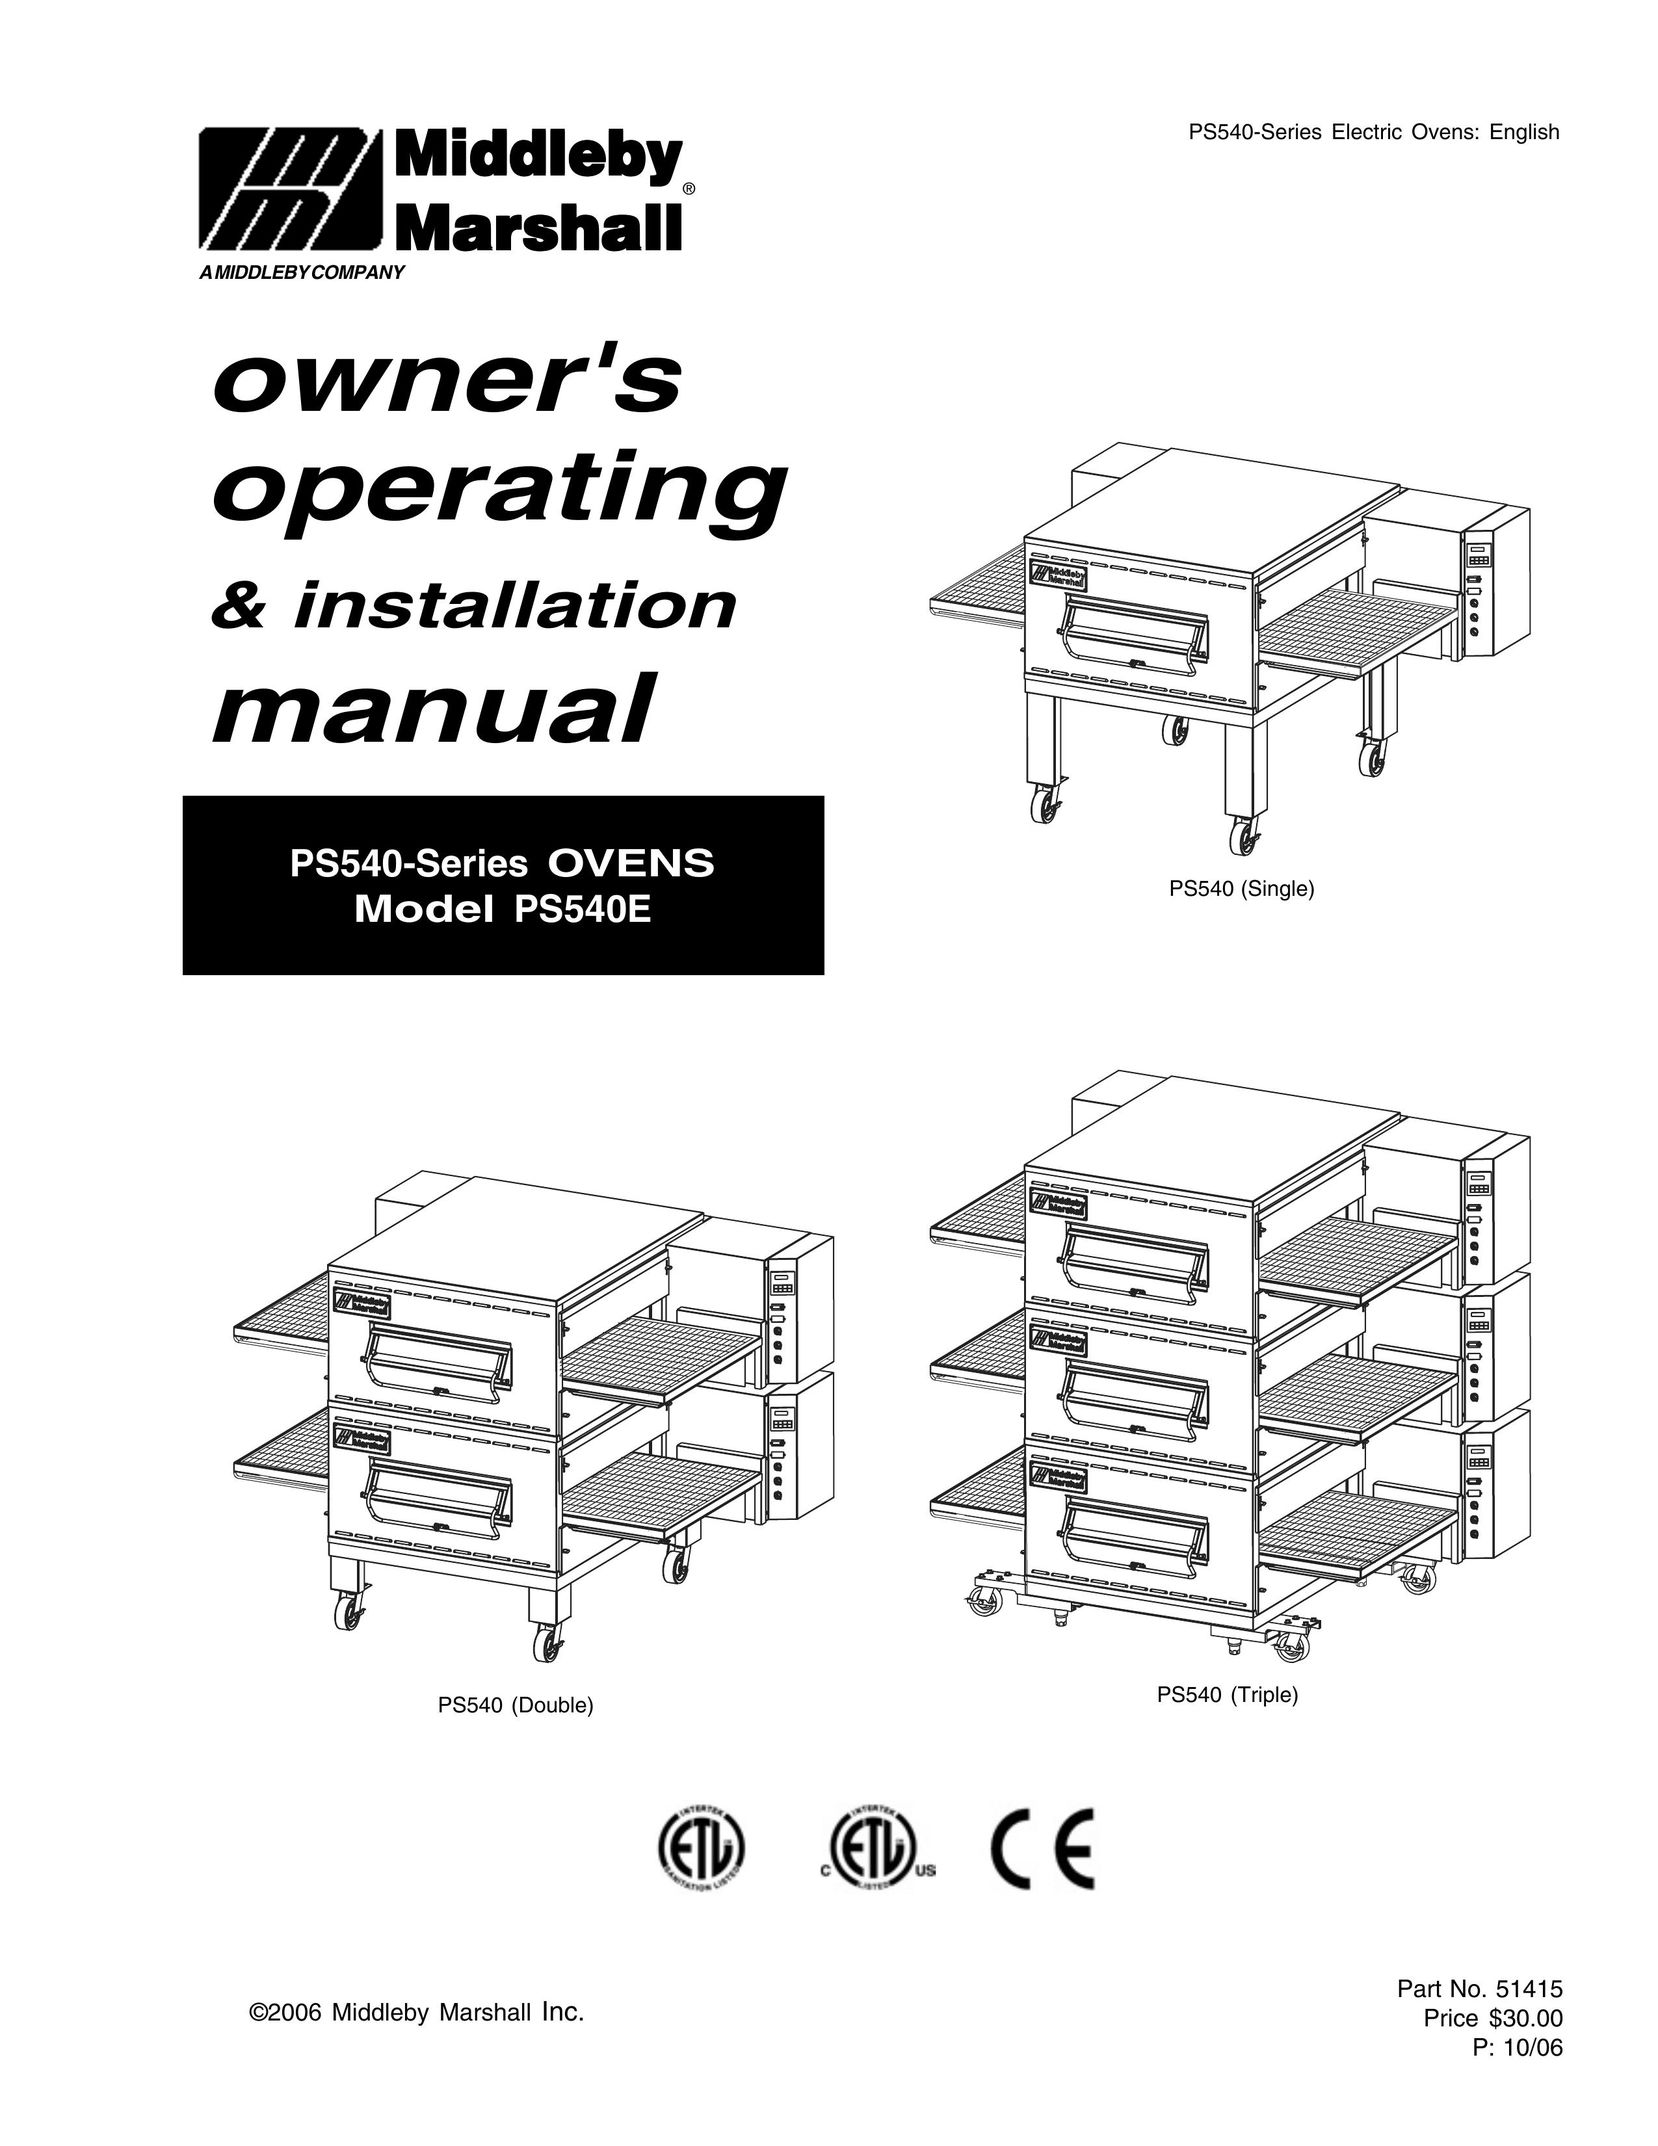 Middleby Marshall PS540 (Double) Oven User Manual